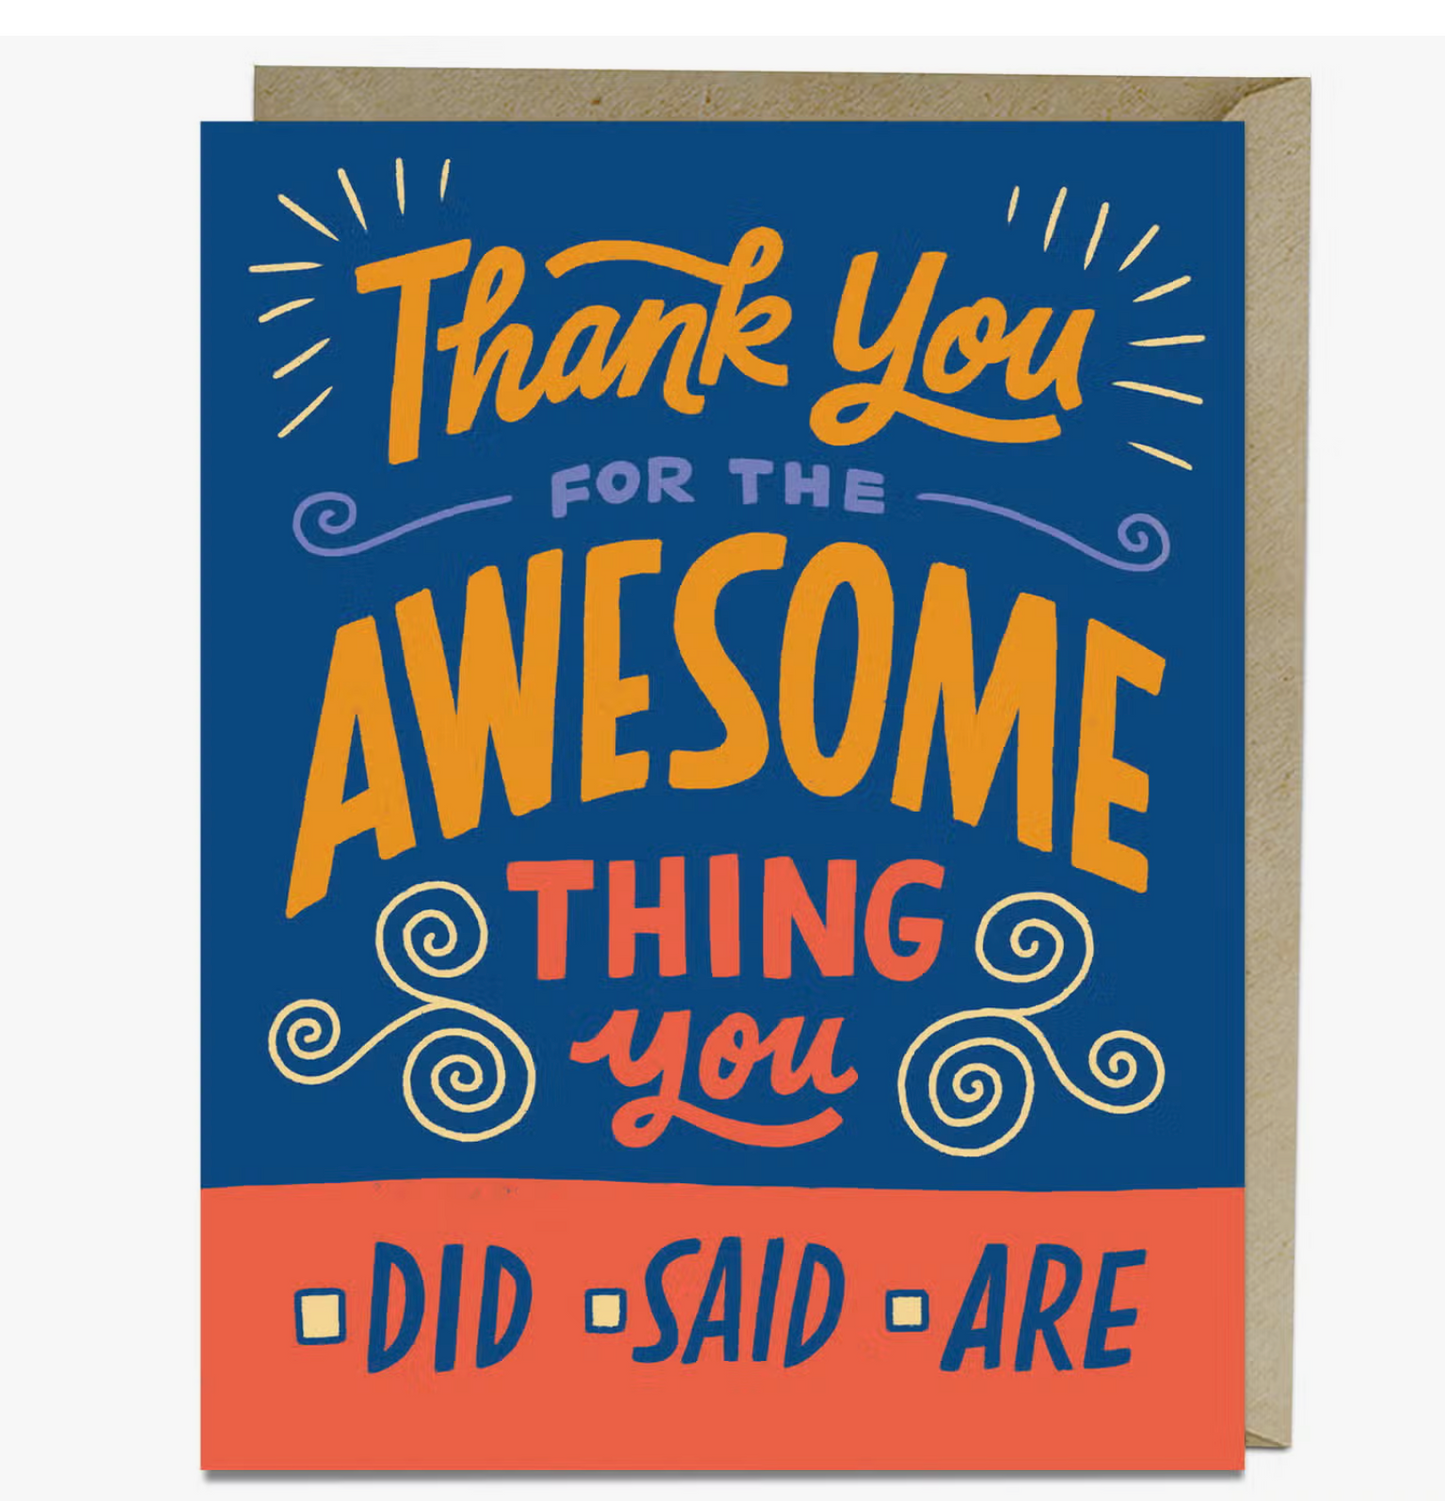 Thank You For The Awesome Thing You Did, Said, Are Card